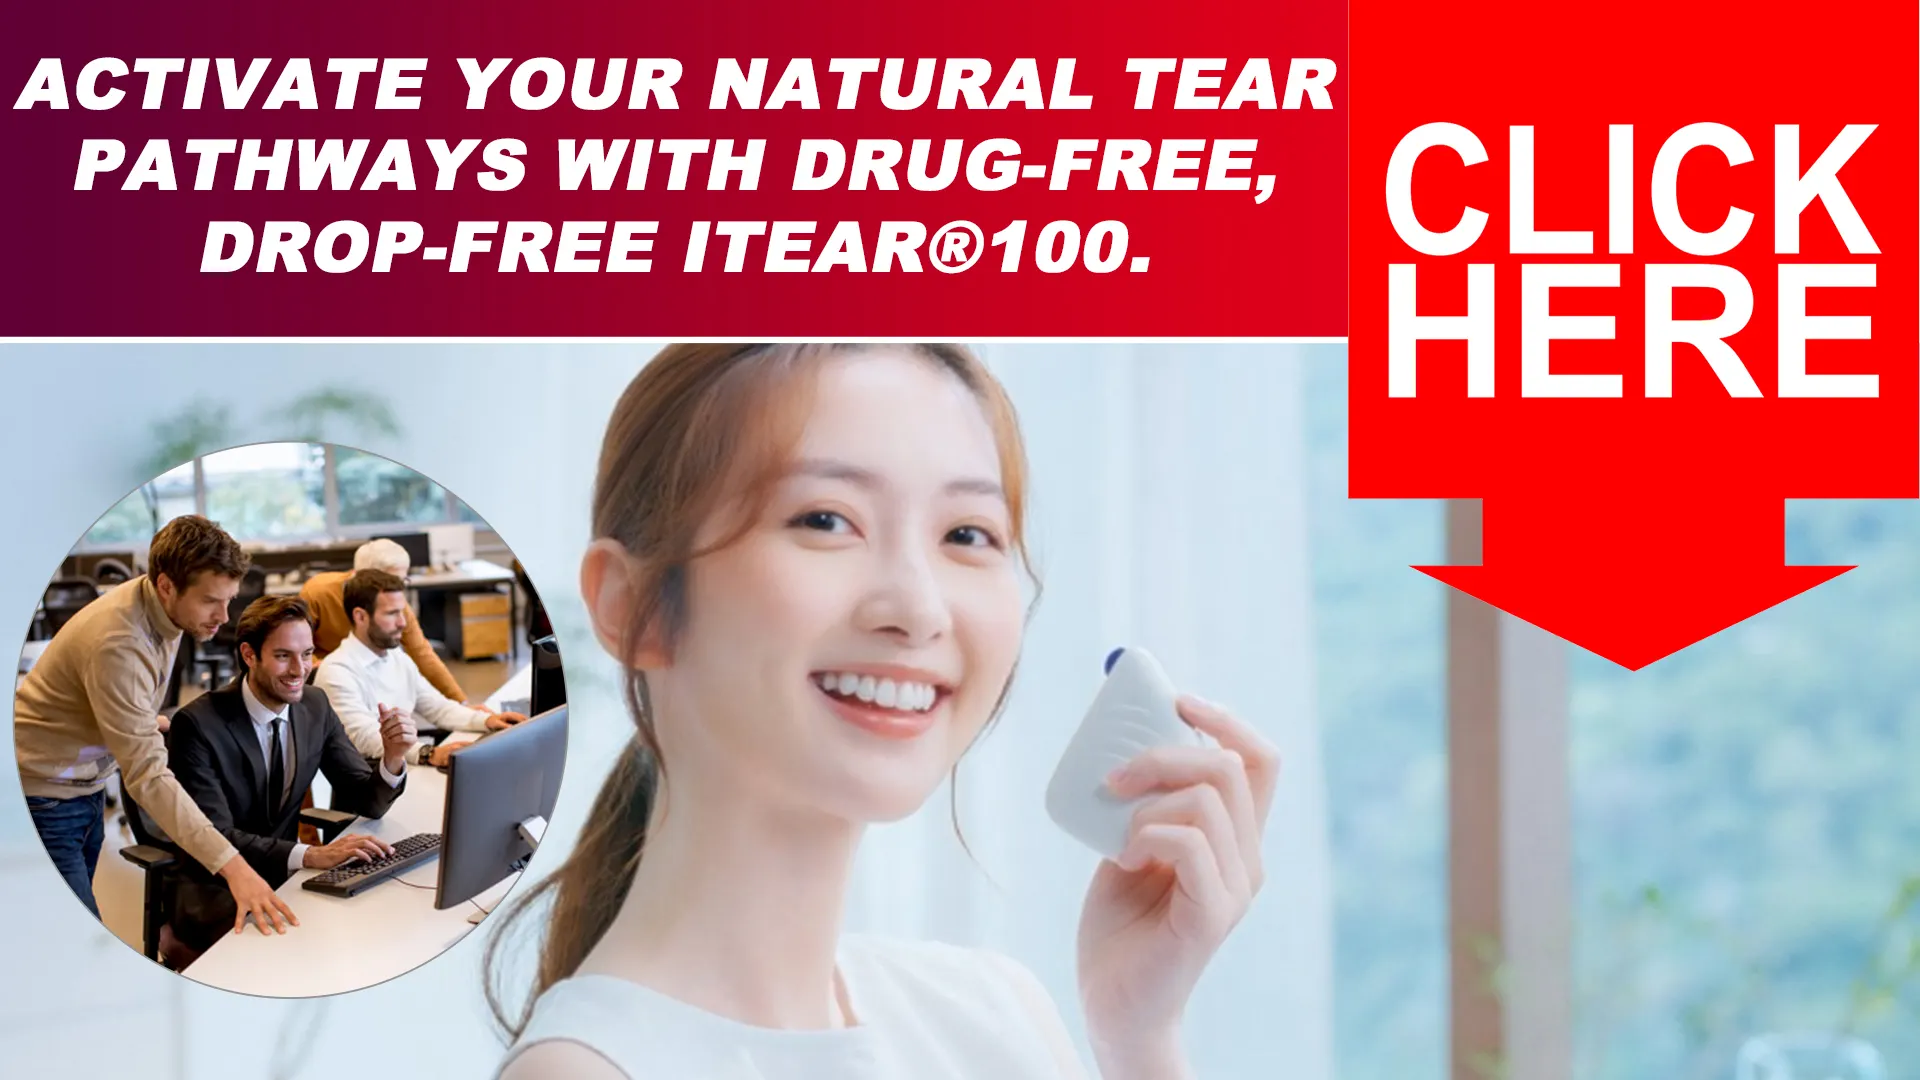 The Role of iTEAR100 in Combating Dry Eyes